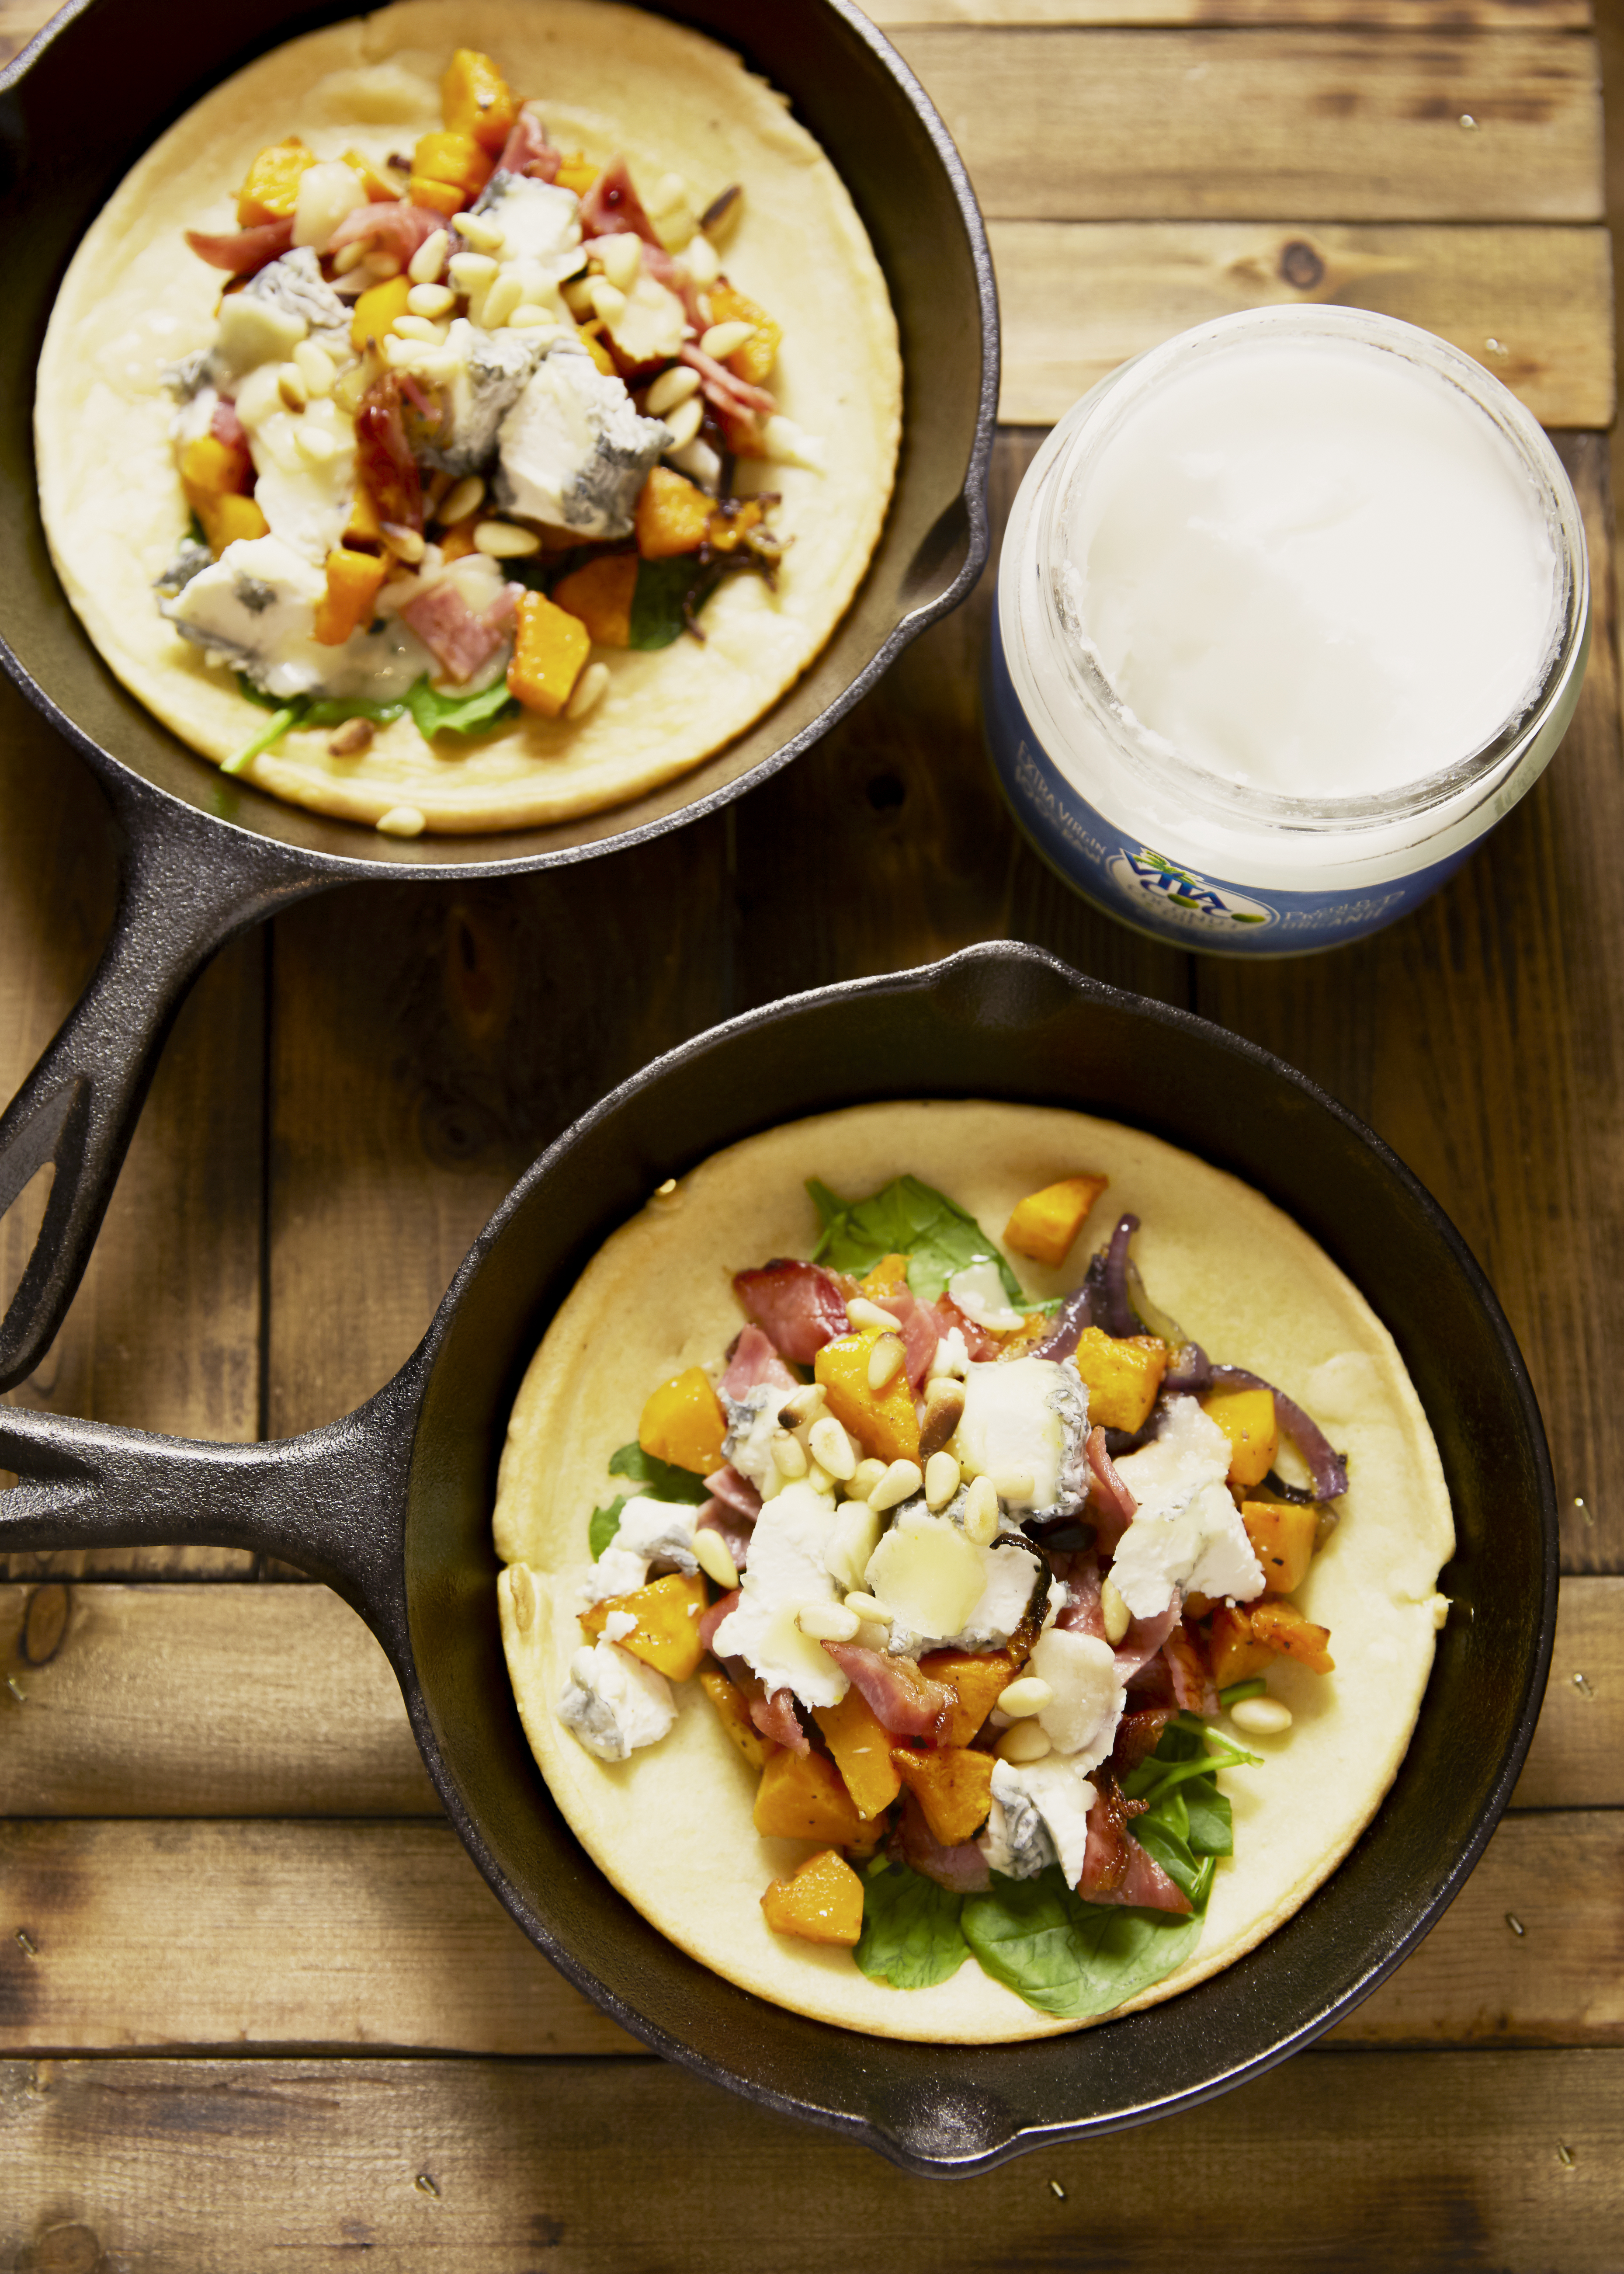 Butternut Squash, Goat’s cheese and Crispy Bacon Pancake